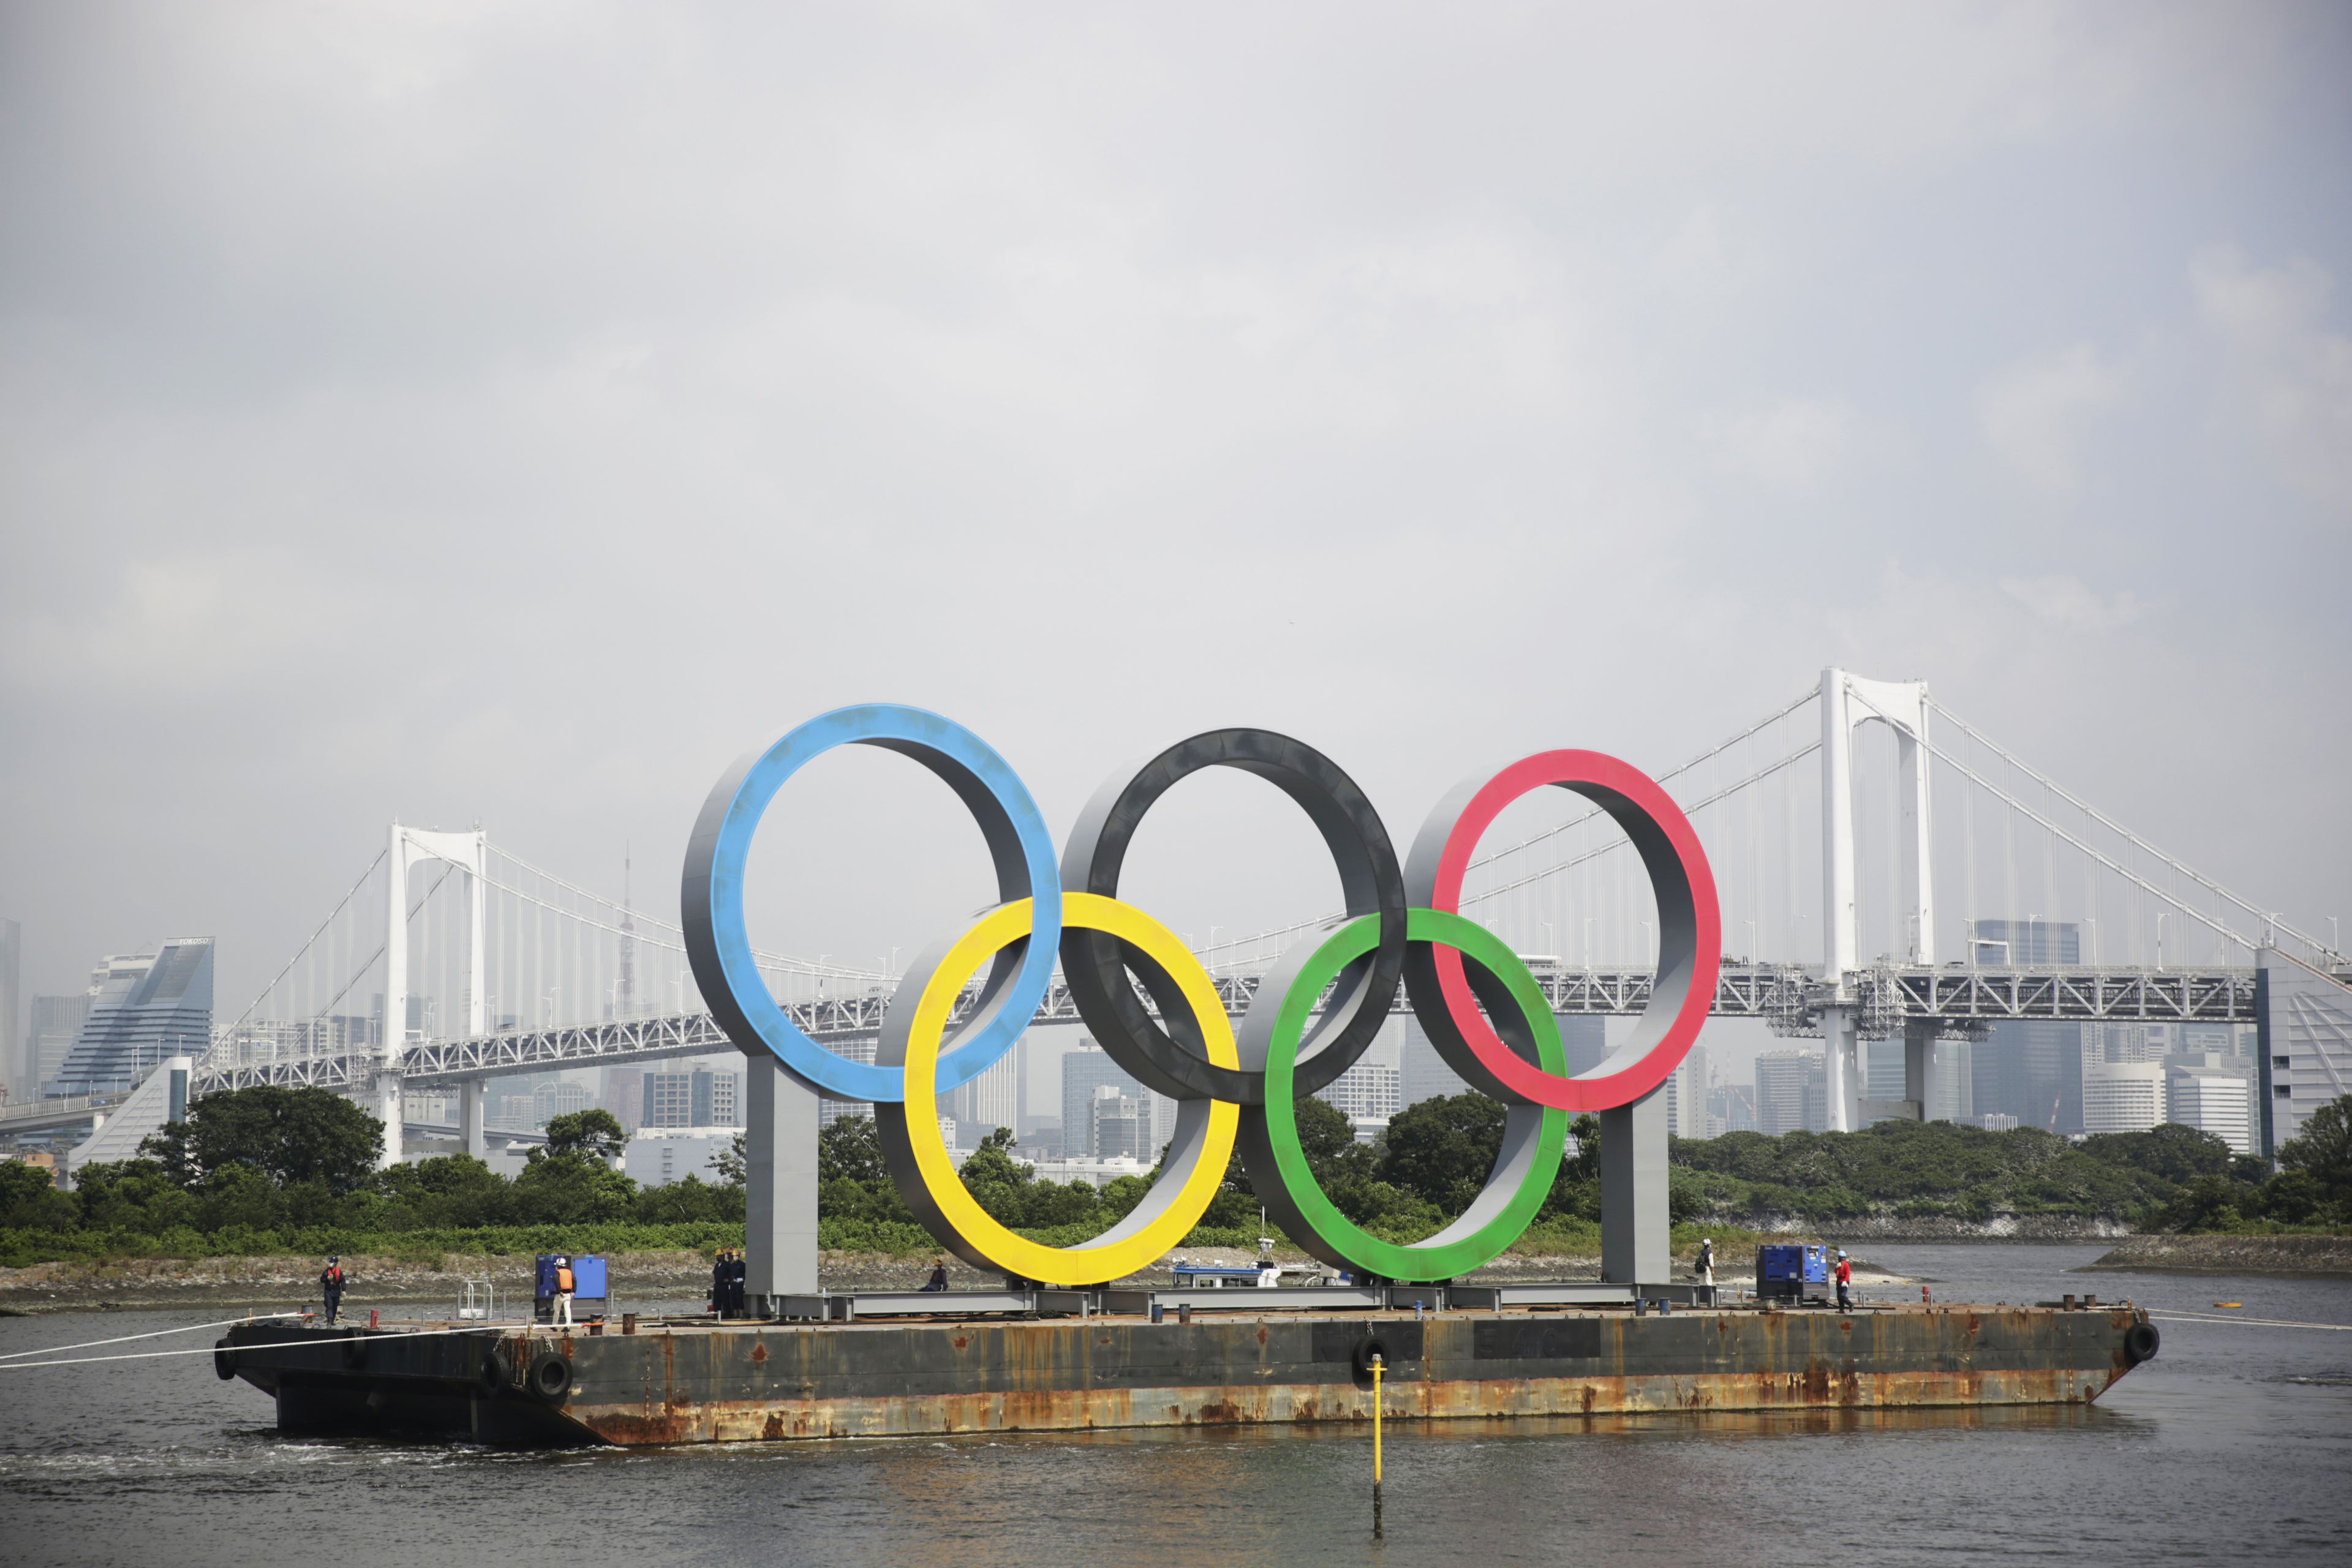 Tugboats move a symbol installed for the Olympic and Paralympic Games in Tokyo.